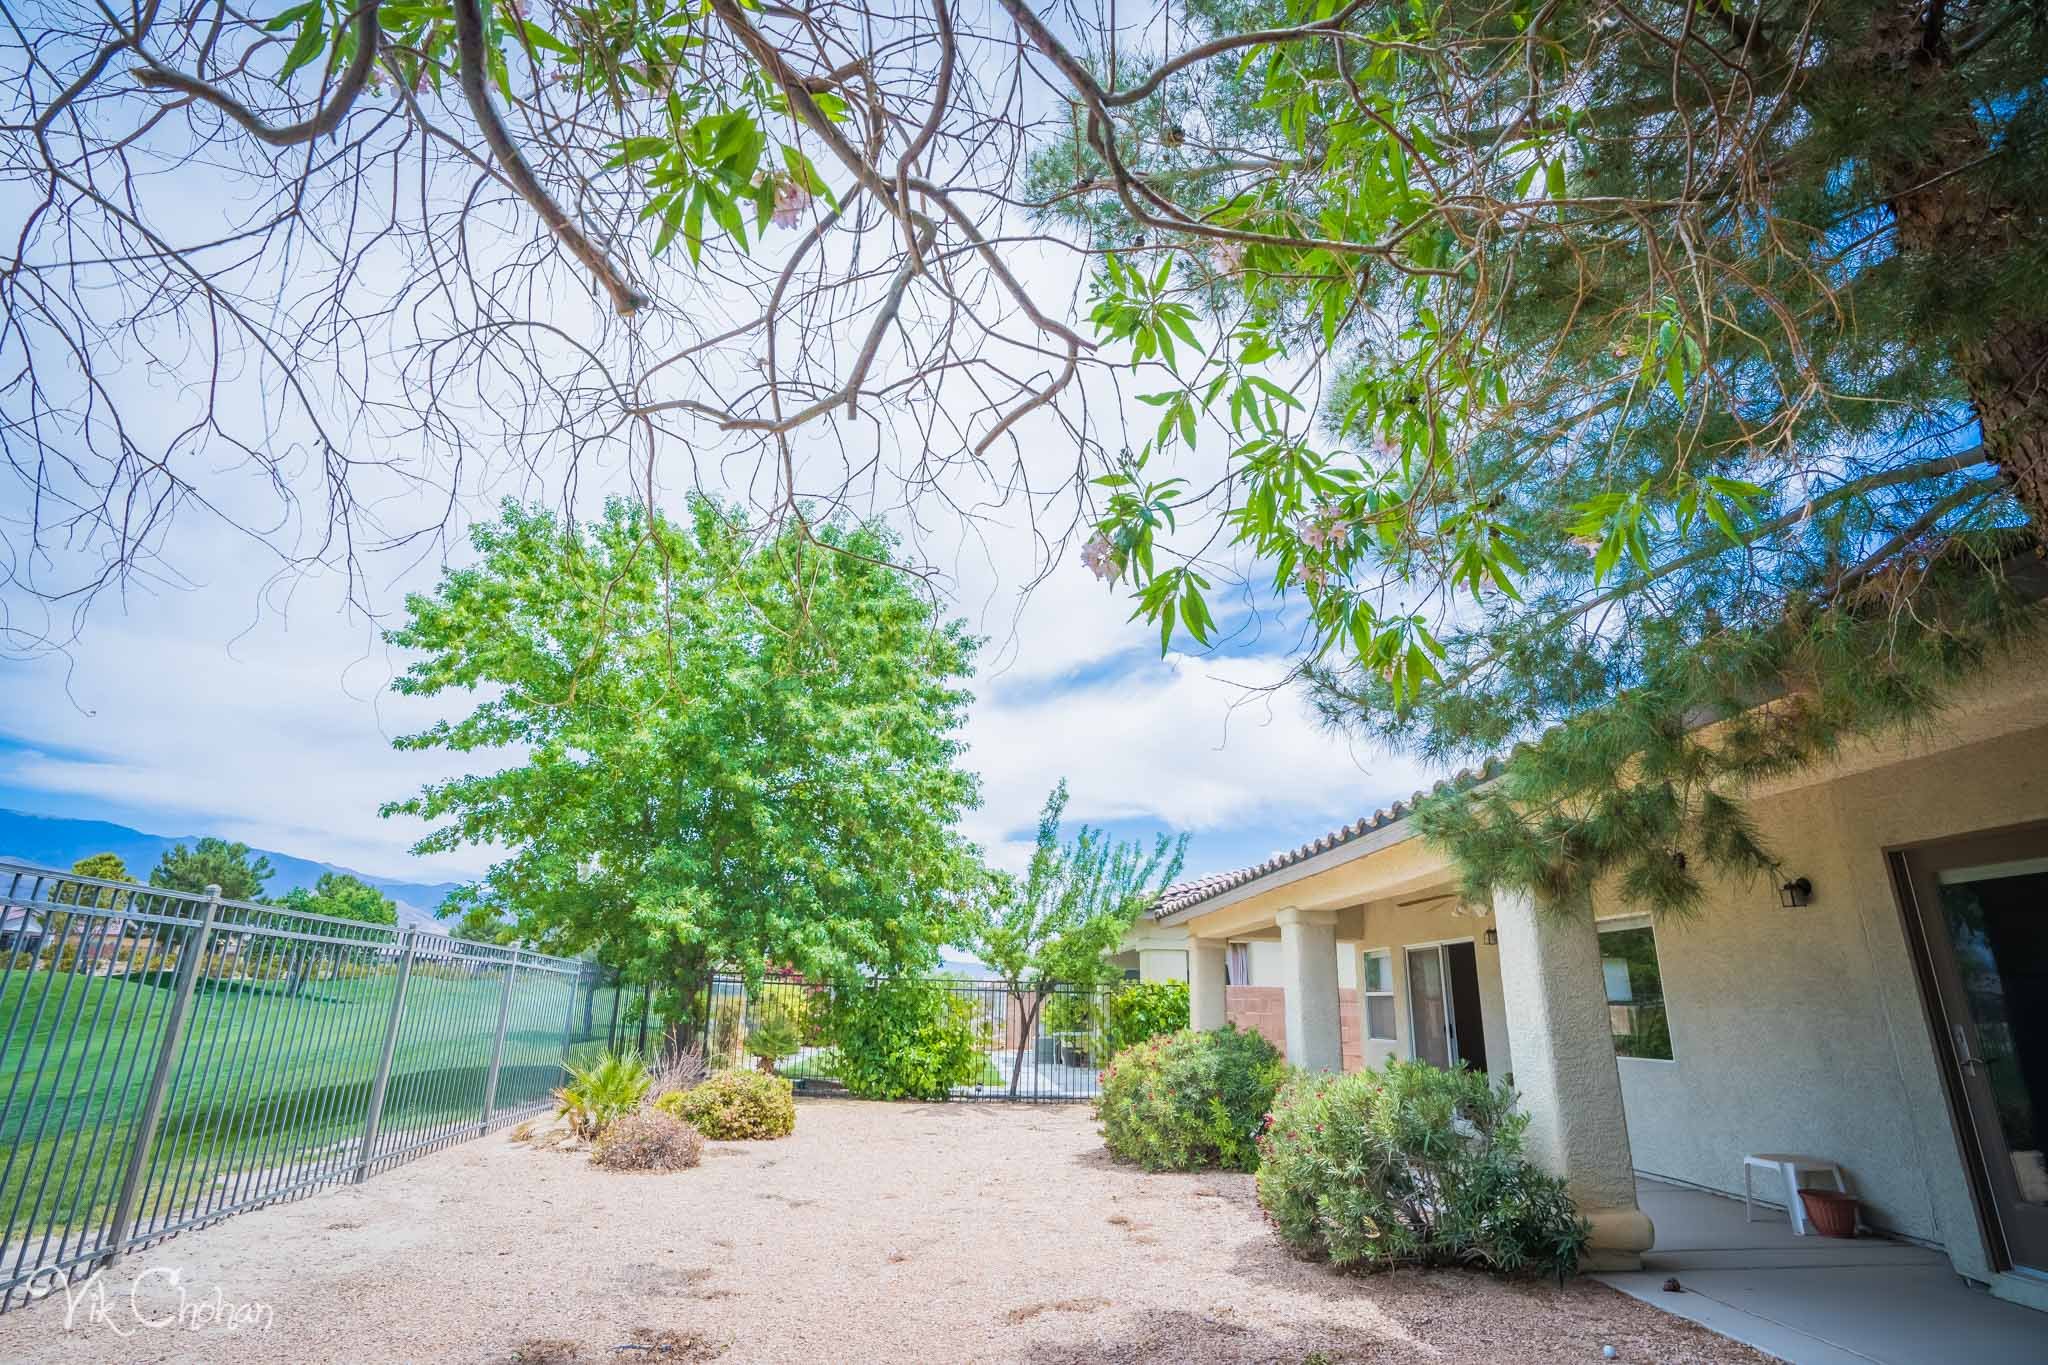 2022-05-15-5378-E-Cansano-St-Pahrump-Real-Estate-Photography-Virtual-Tour-Drone-Photography-Vik-Chohan-Photography-Photo-Booth-Social-Media-VCP-090.jpg